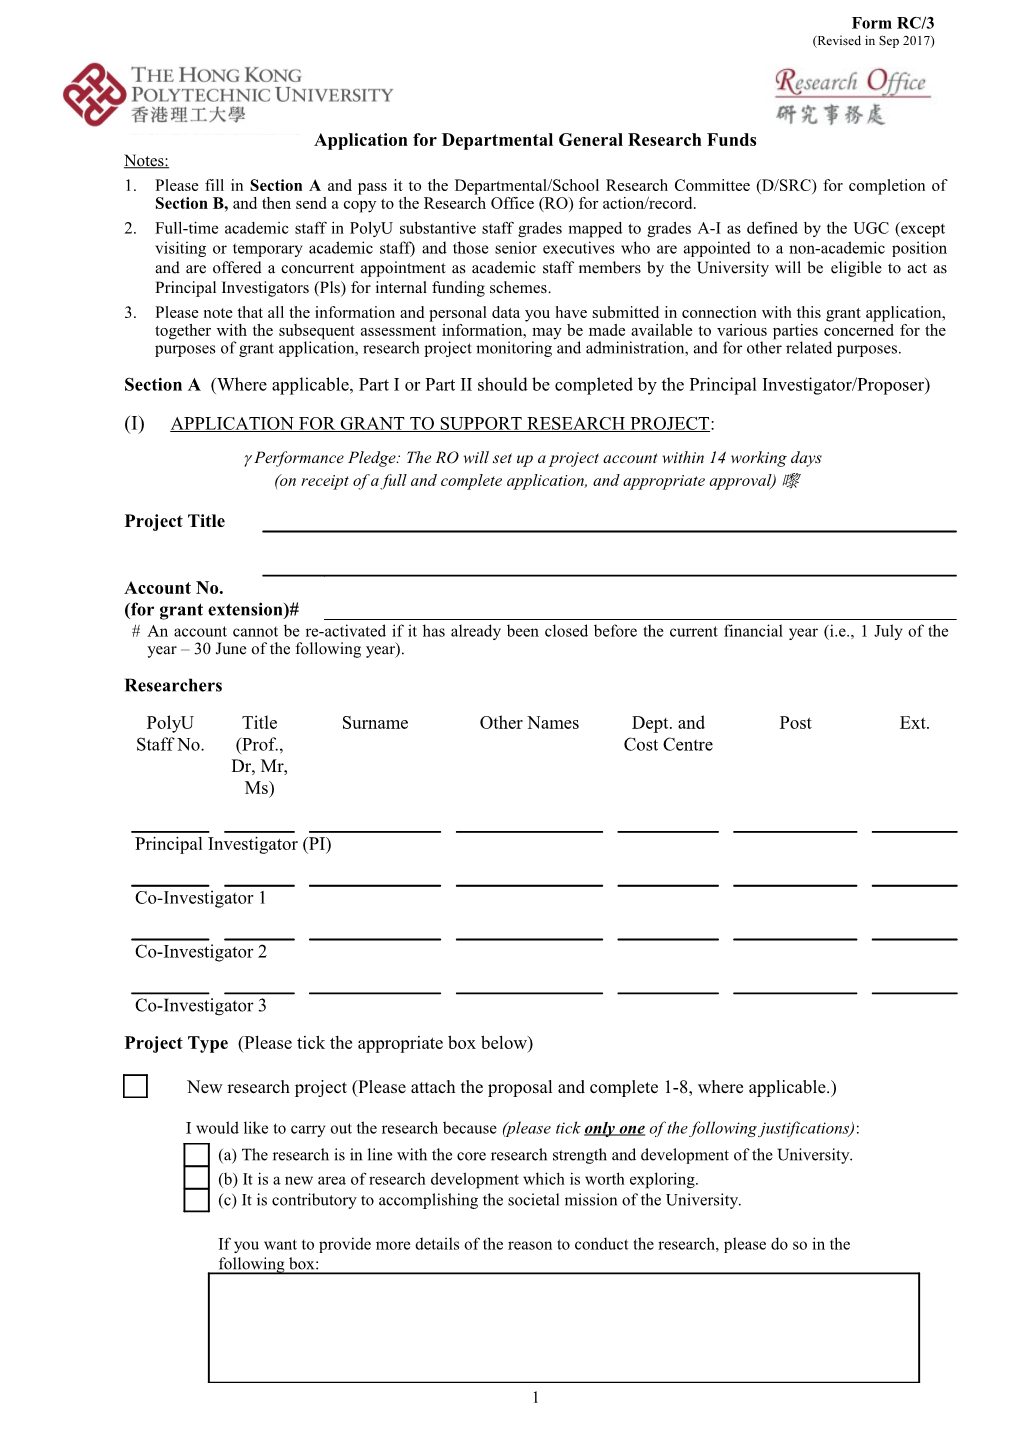 Application for Departmental General Research Funds